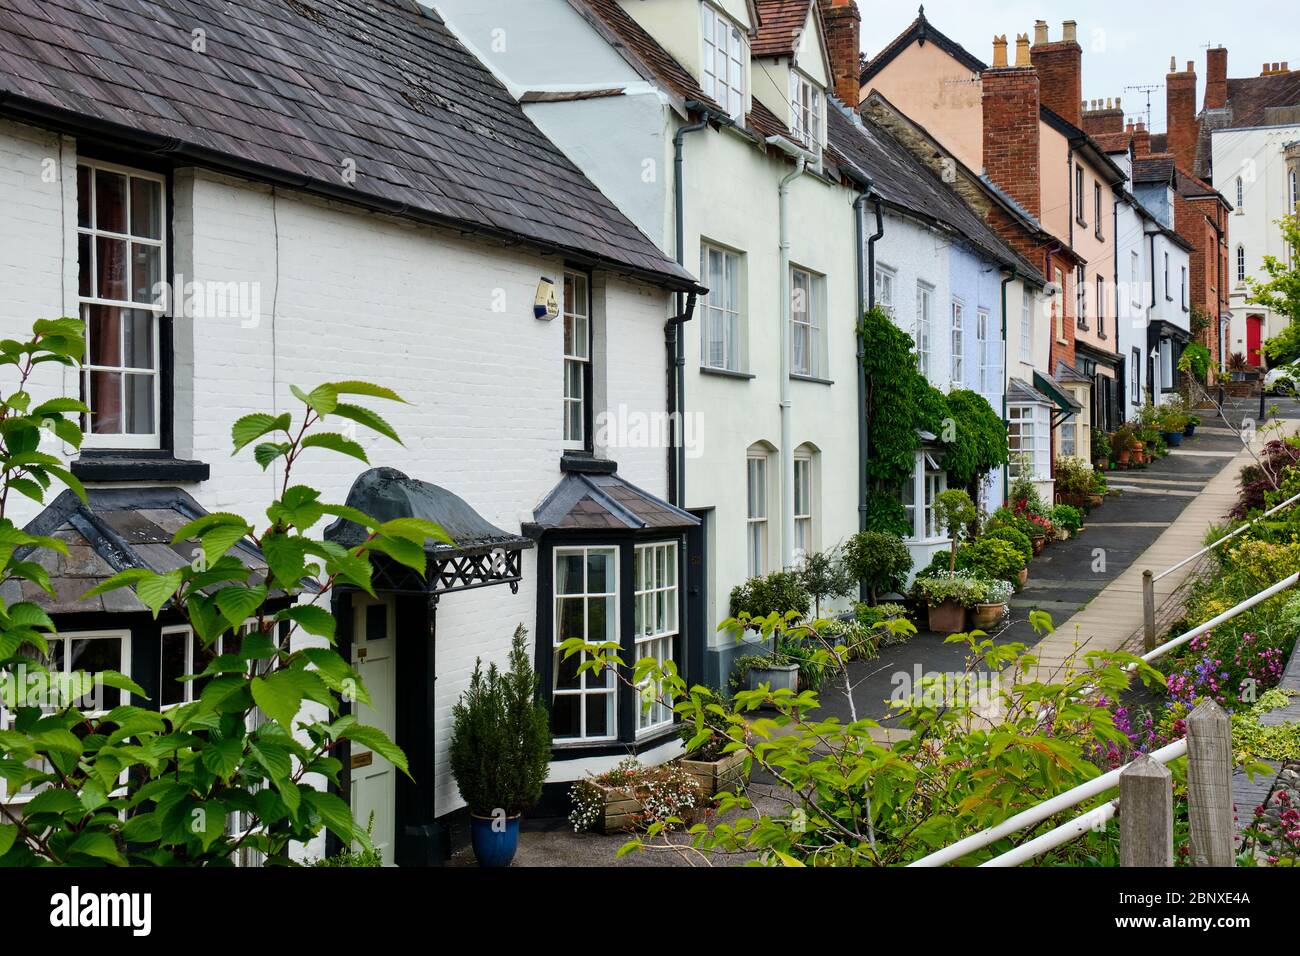 Cottage in Lower Broad Street, Ludlow, Shropshire Foto Stock